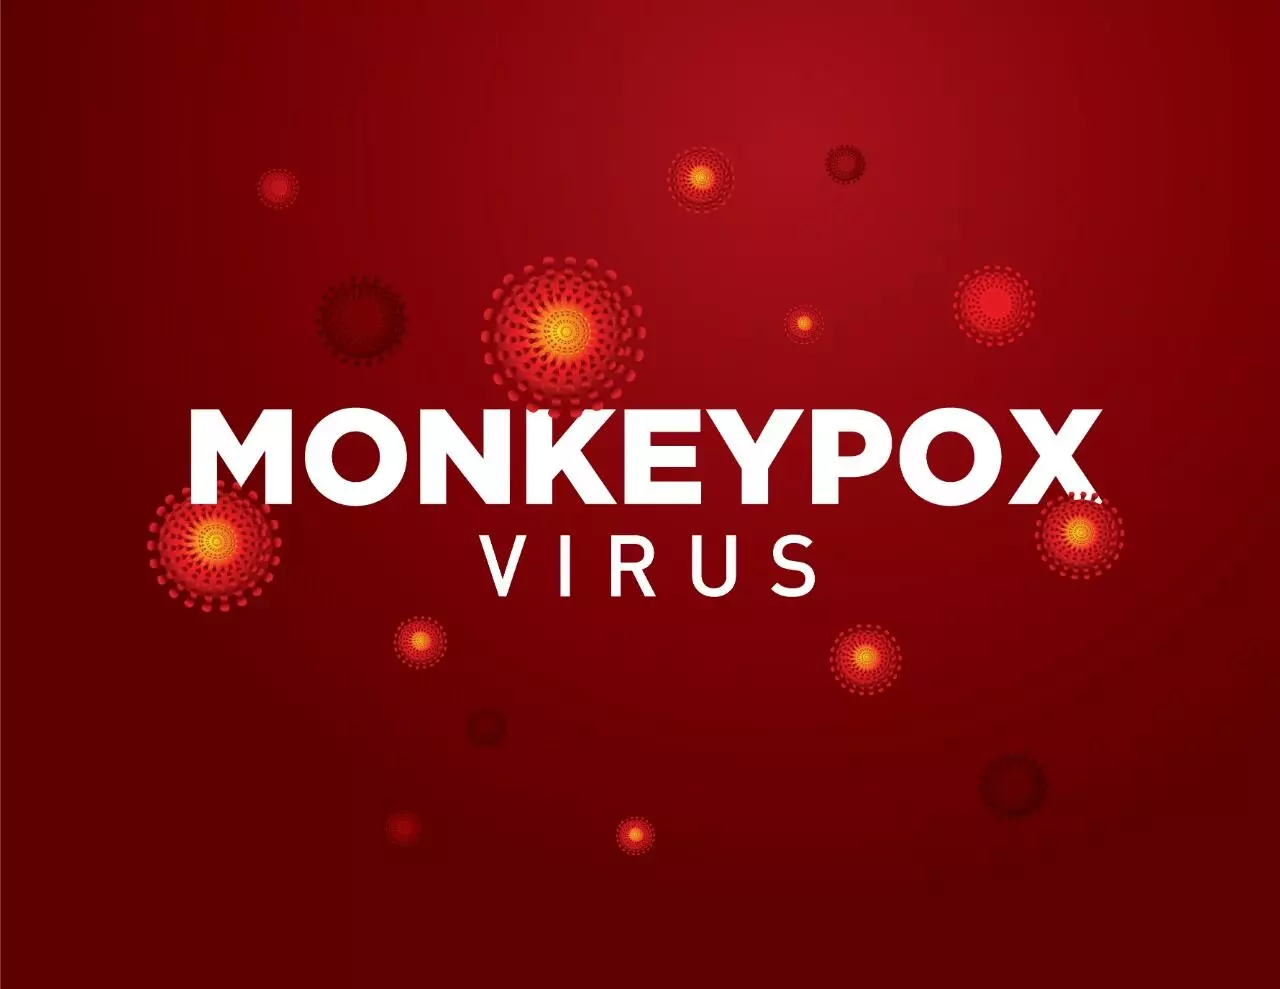 Monkeypox: All you need to know